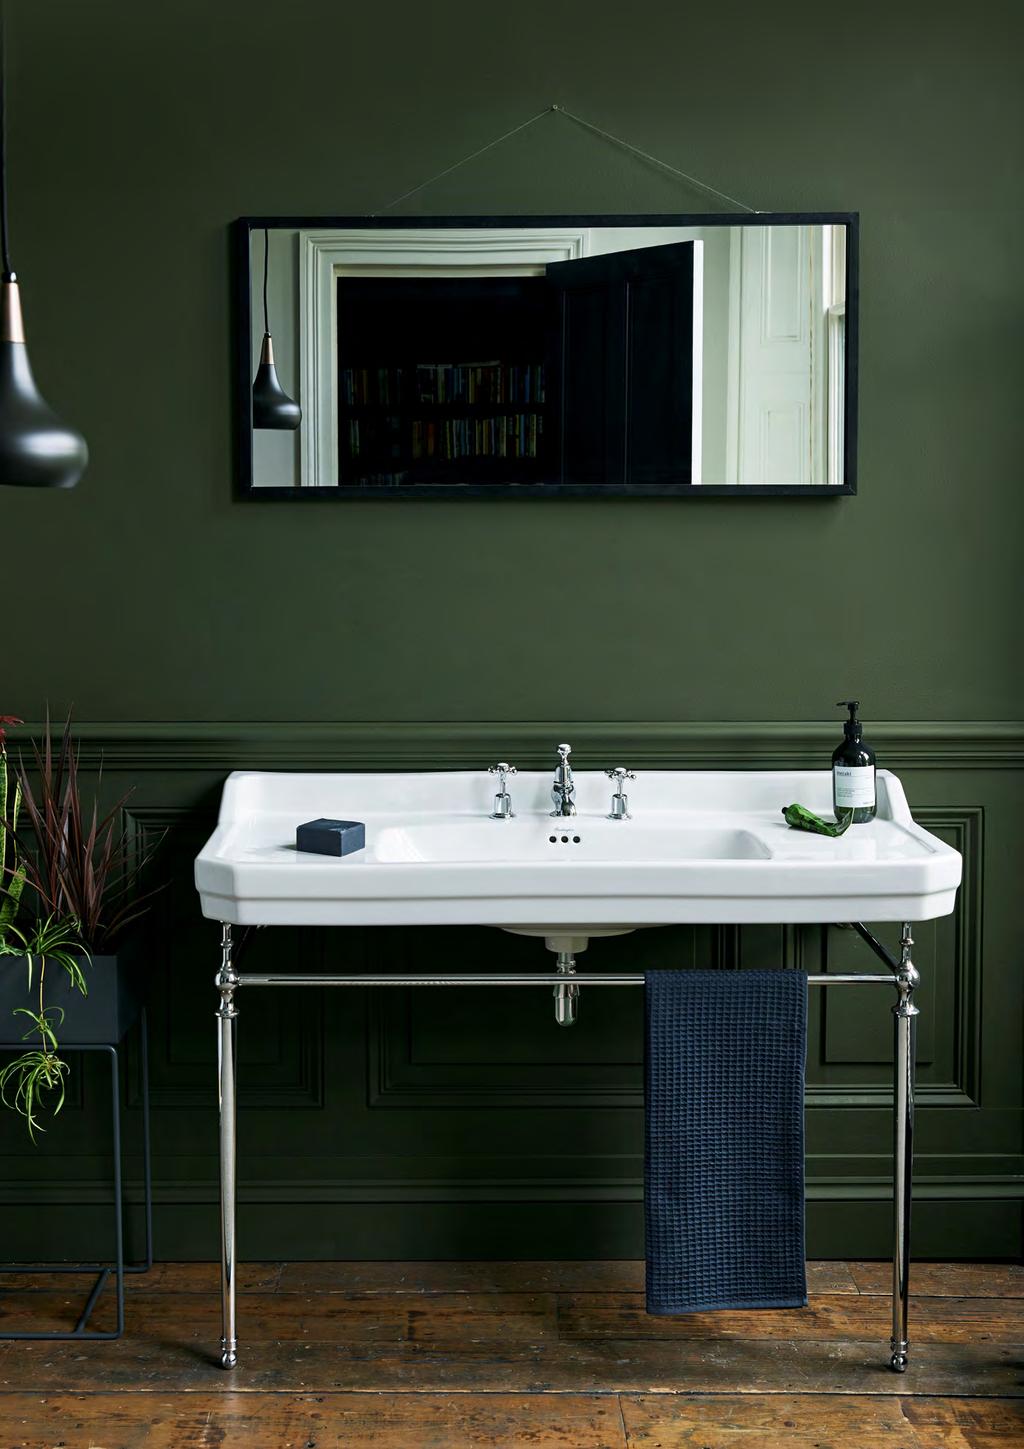 EDWARDIAN BASINS Edwardian The Edwardian collection is the ultimate in traditional bathrooms with structured upstands and angular designs.